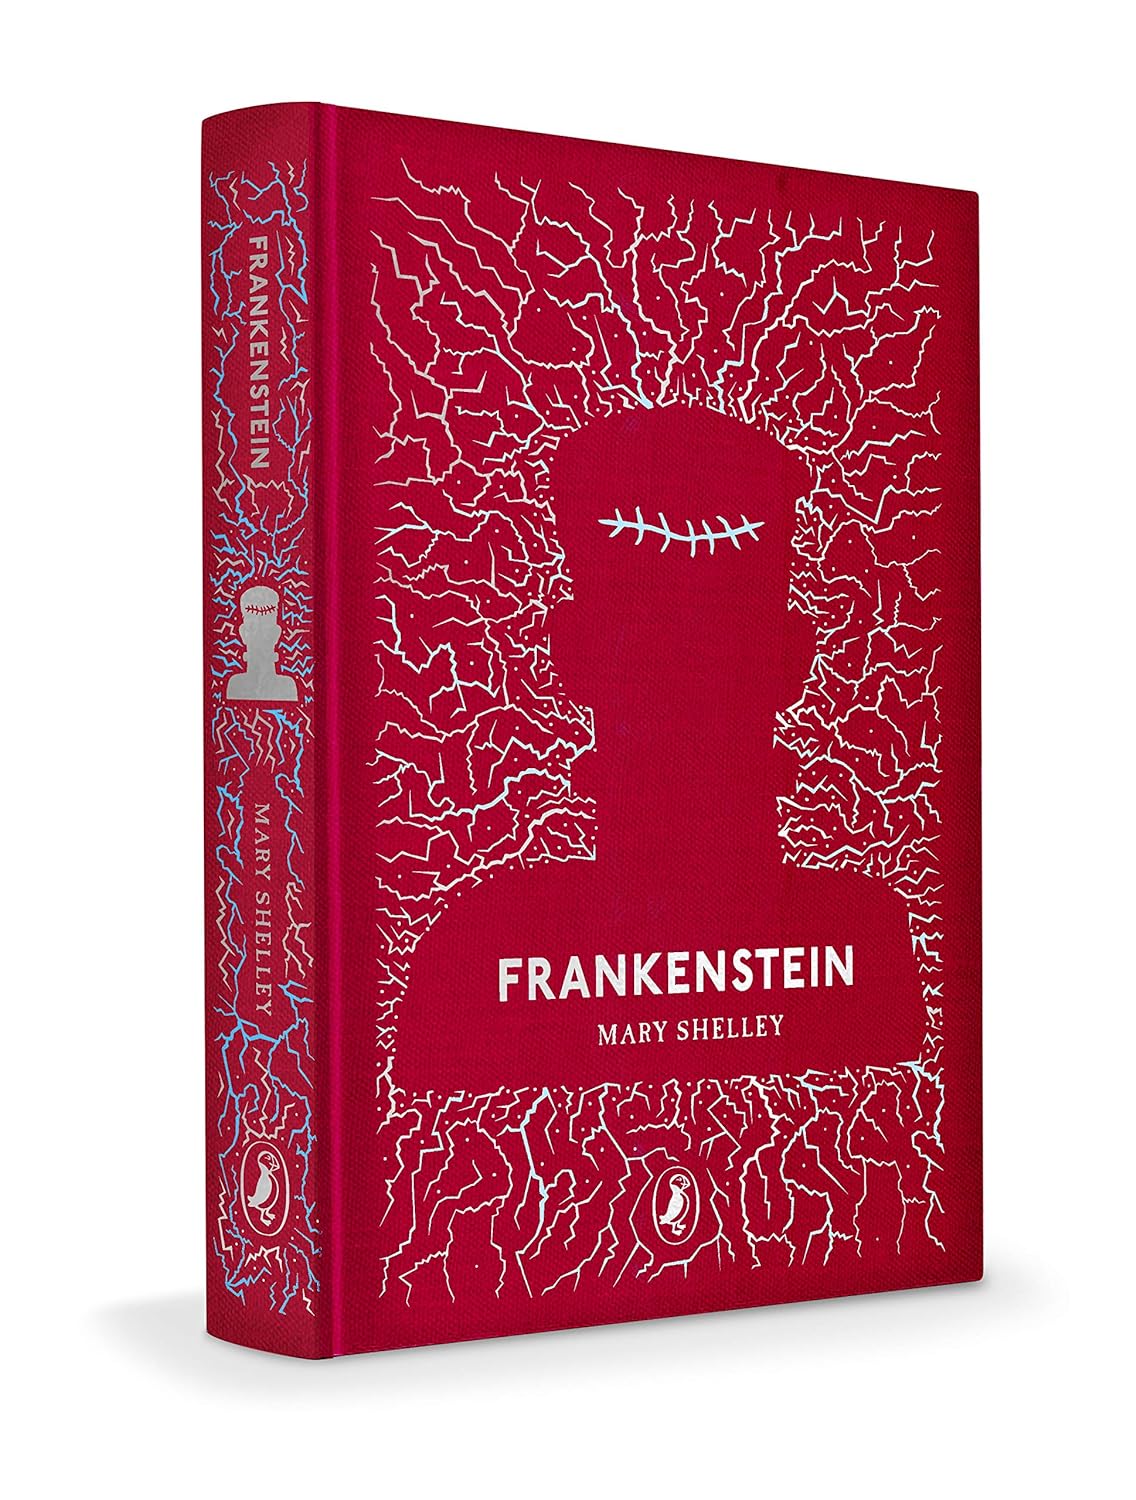 Frankenstein by Mary Shelley - Puffin Clothbound Classics Edition - Looking Glass Books -